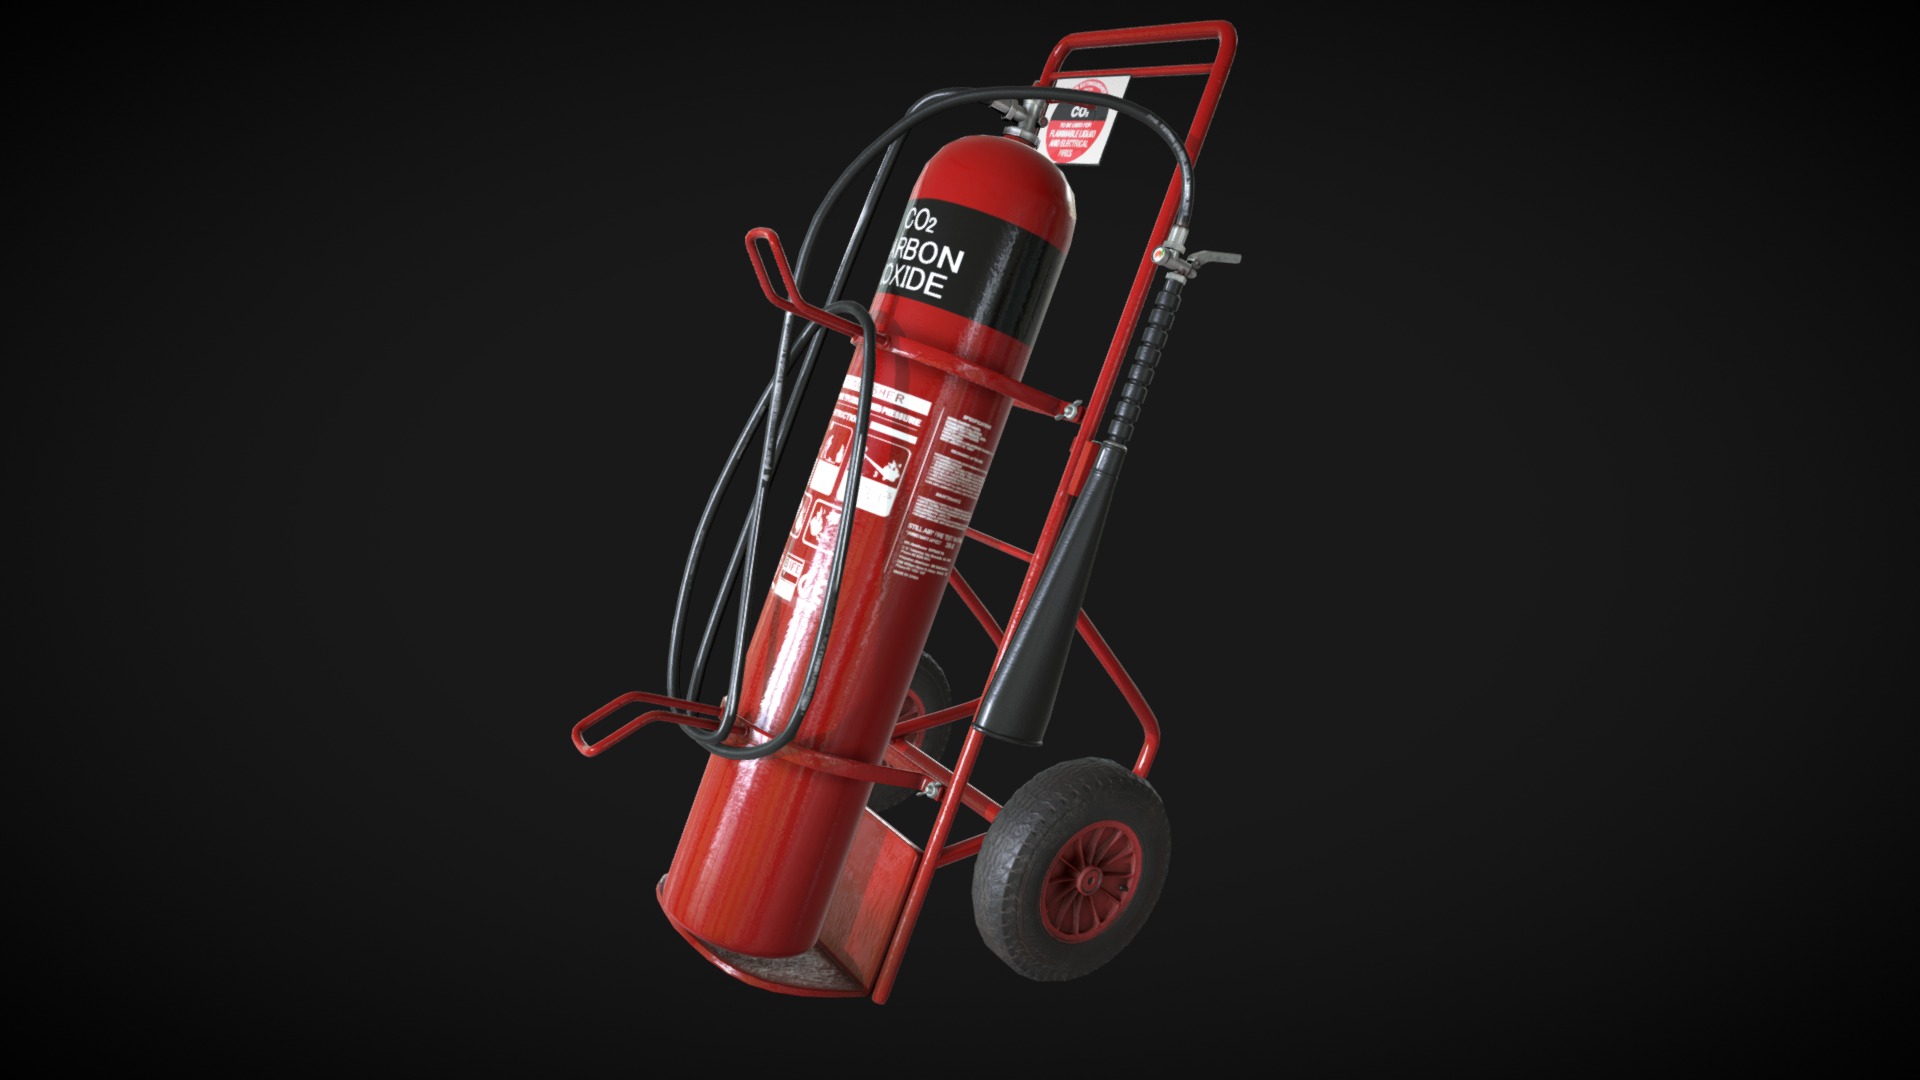 3D model SM Fire Exinguisher V02 001 - This is a 3D model of the SM Fire Exinguisher V02 001. The 3D model is about a red and white forklift.